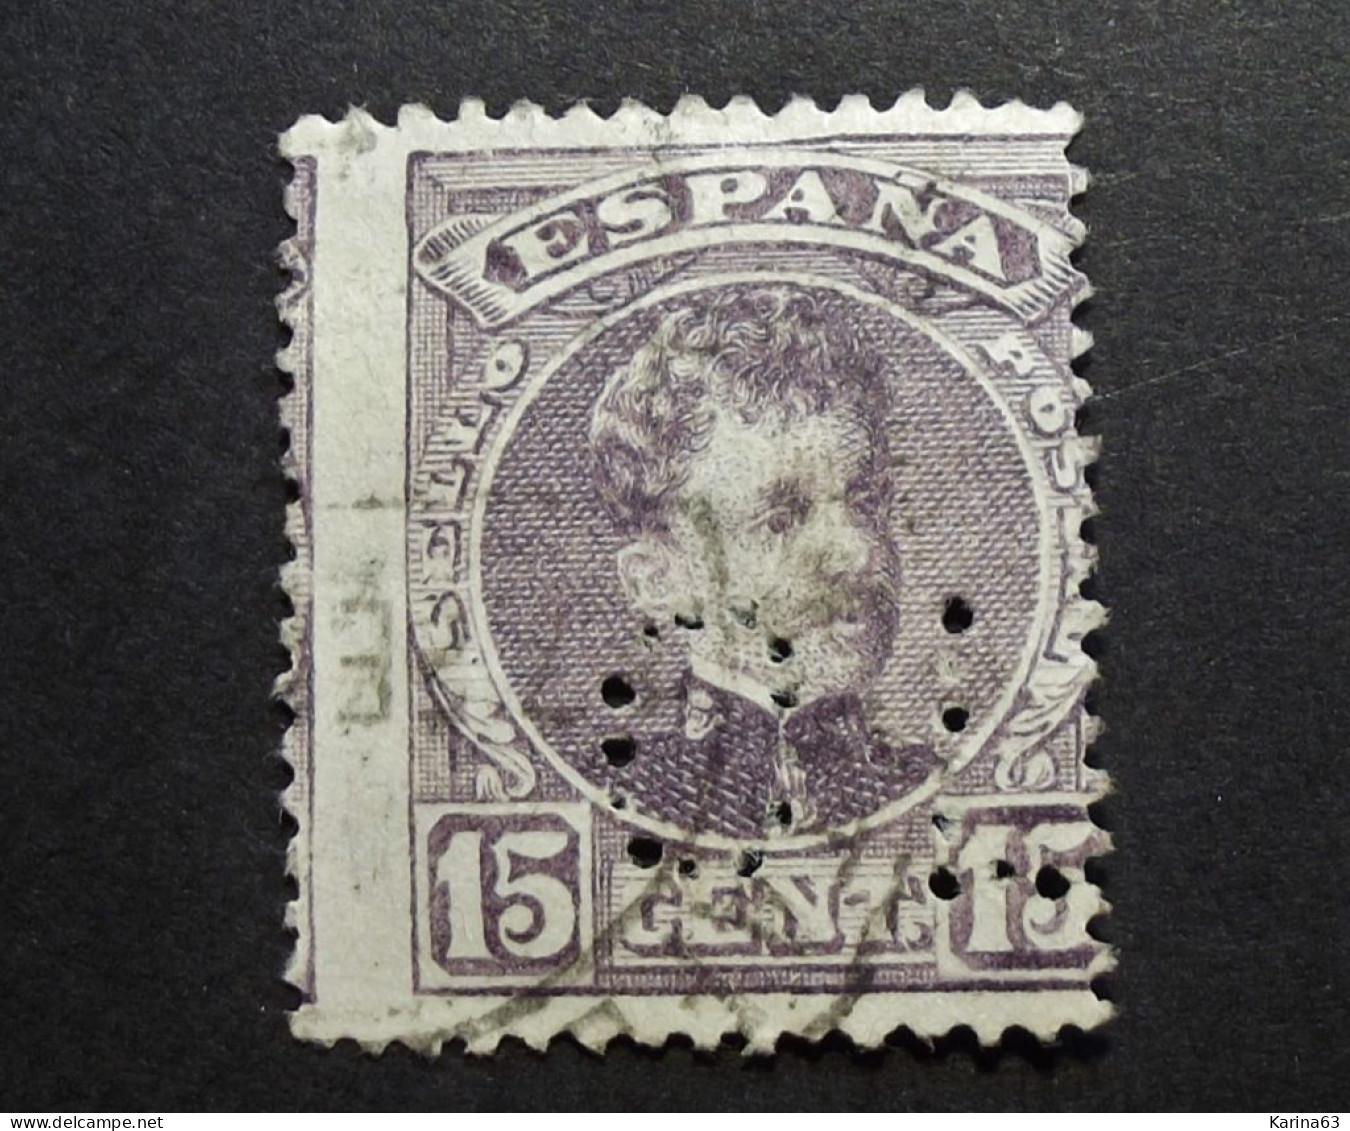 Espana - Spain - Alfonso XIII -  Perfin - Lochung  With Number - C L - Credito Lyones - Cancelled - Gebruikt